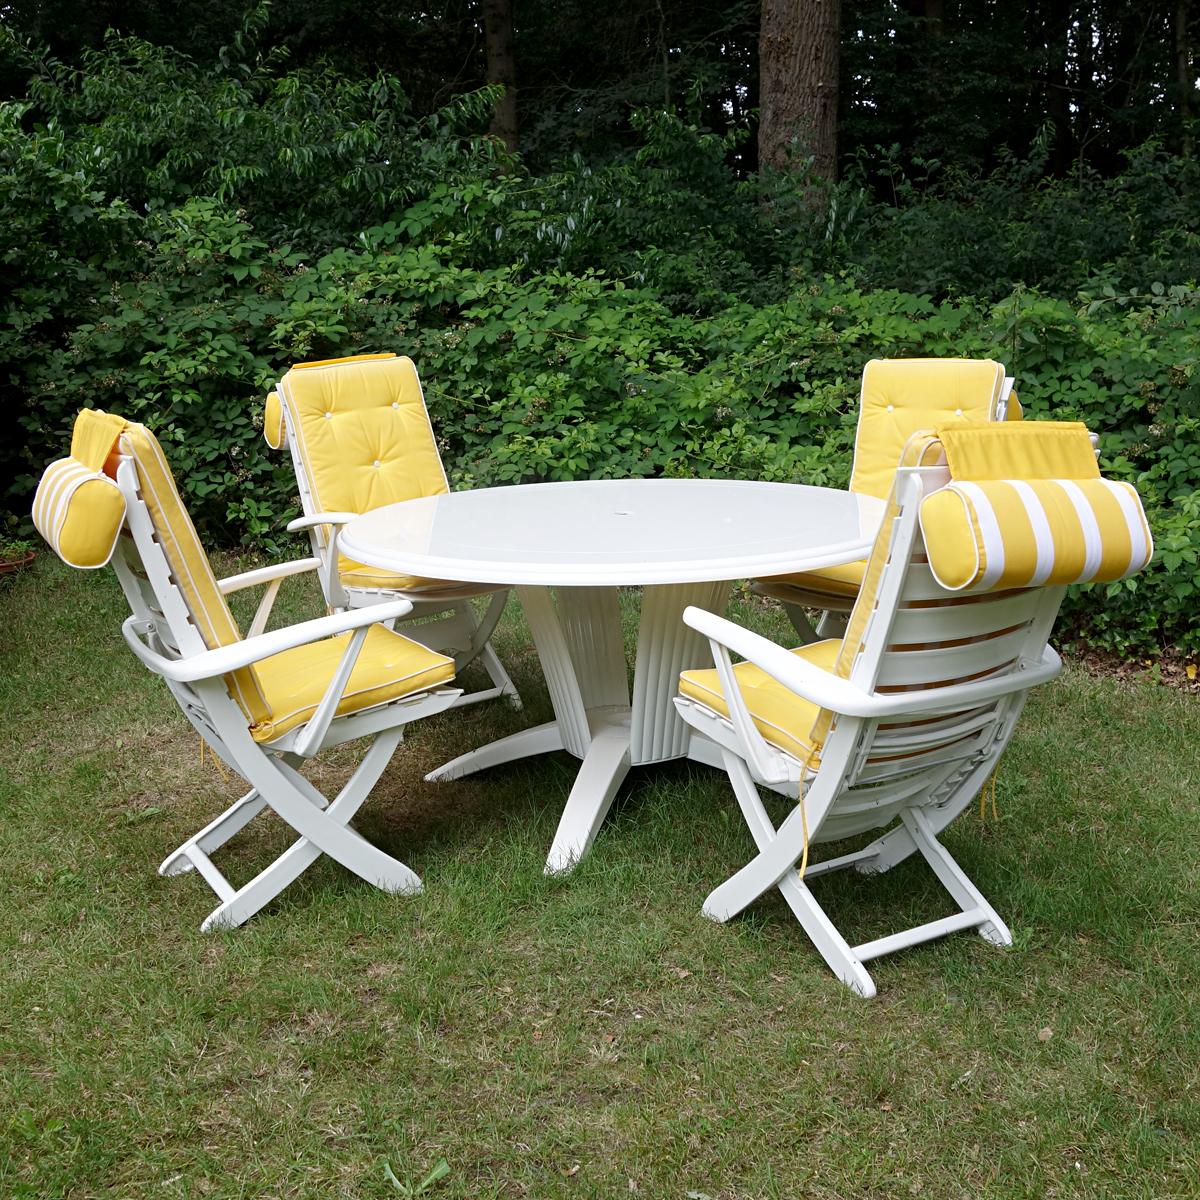 Wonderful set of 4 multi-position armchairs with cushions plus a round table designed and made by French luxury garden furniture specialist Triconfort.

The chairs are made of resin which is a very solid and durable material. These chairs are made